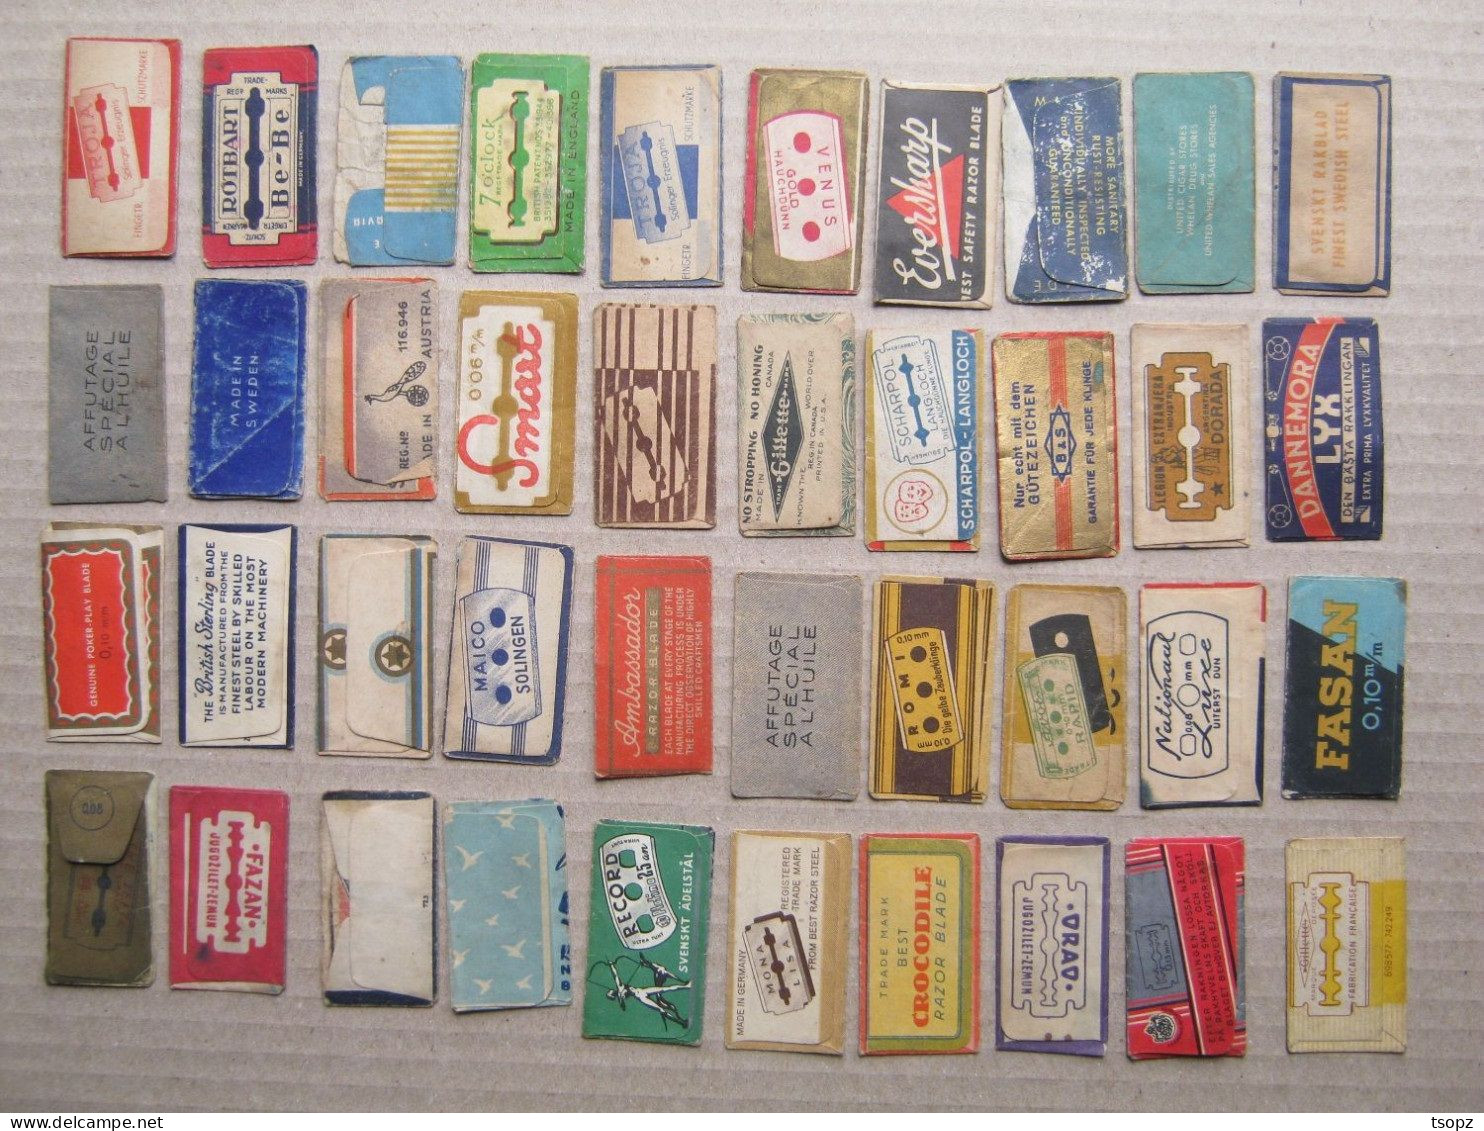 Collection old razor blades wrappers ( about 150 pieces )